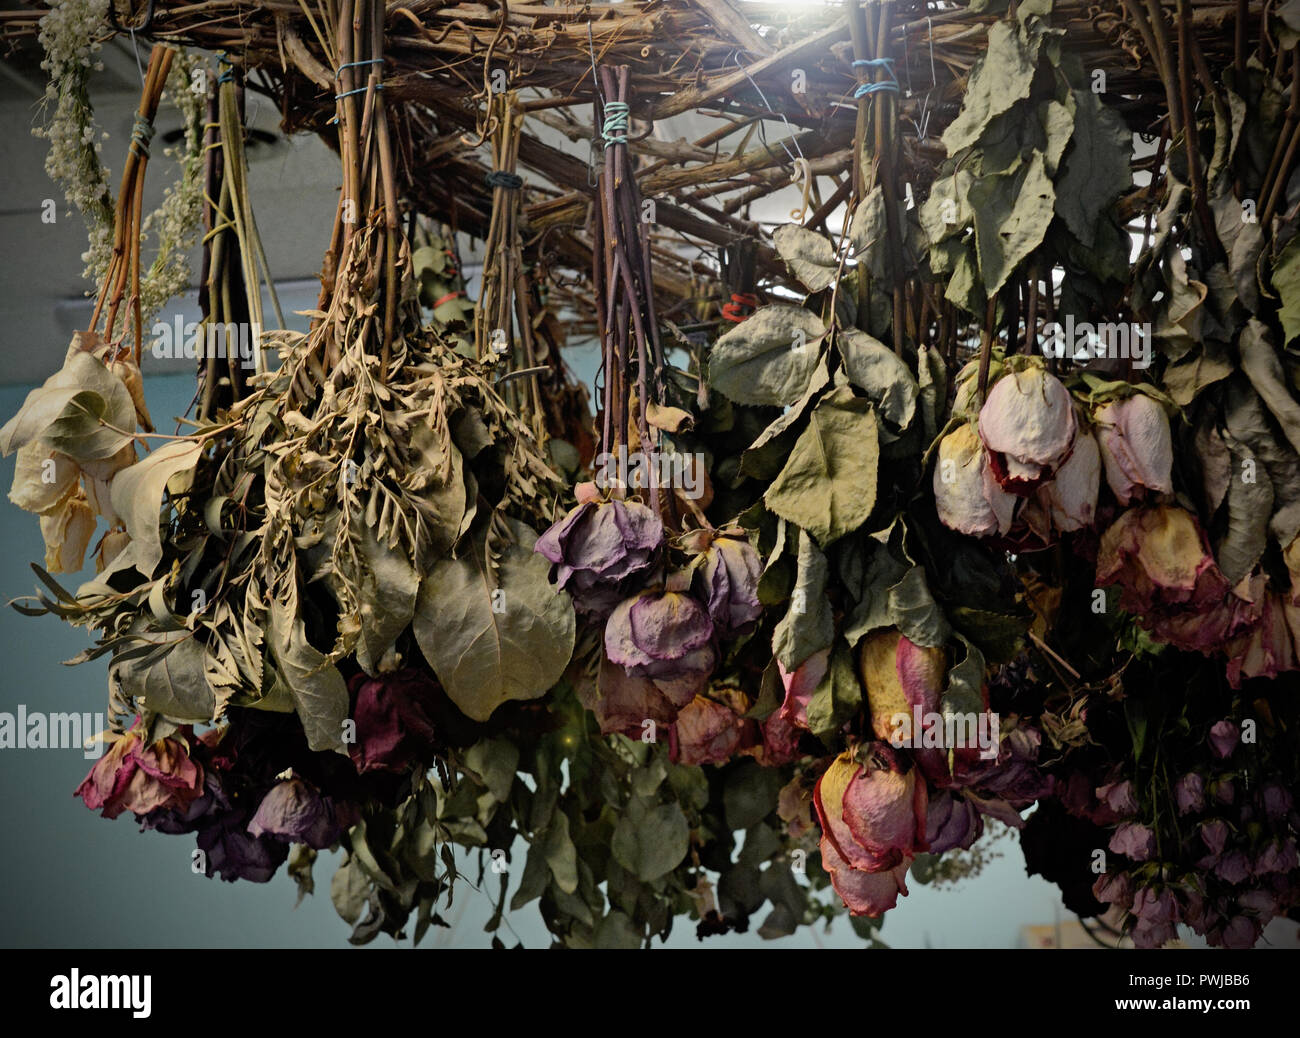 Photo of flowers hanging upside down from the ceiling to dry and naturally preserve. Roses and other florals. Stock Photo